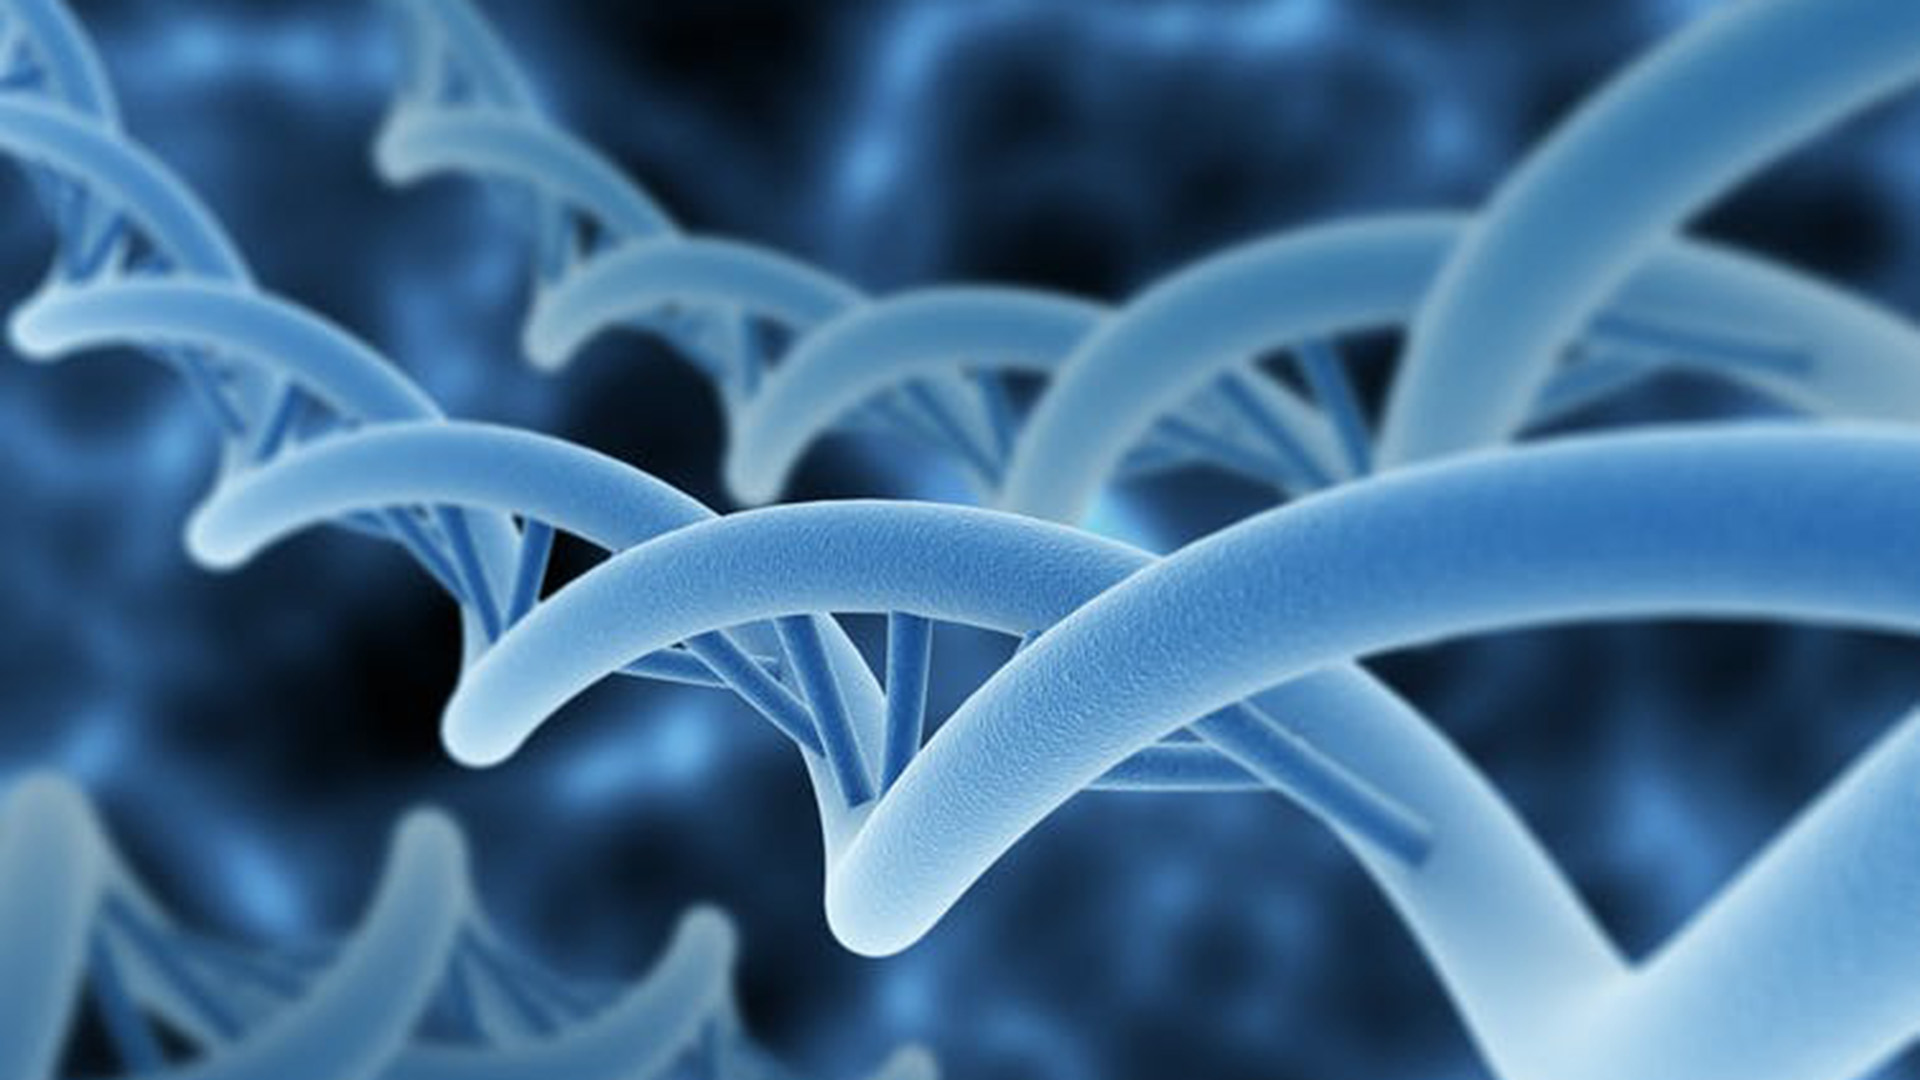 Stock image from Shutterstock of DNA double helix